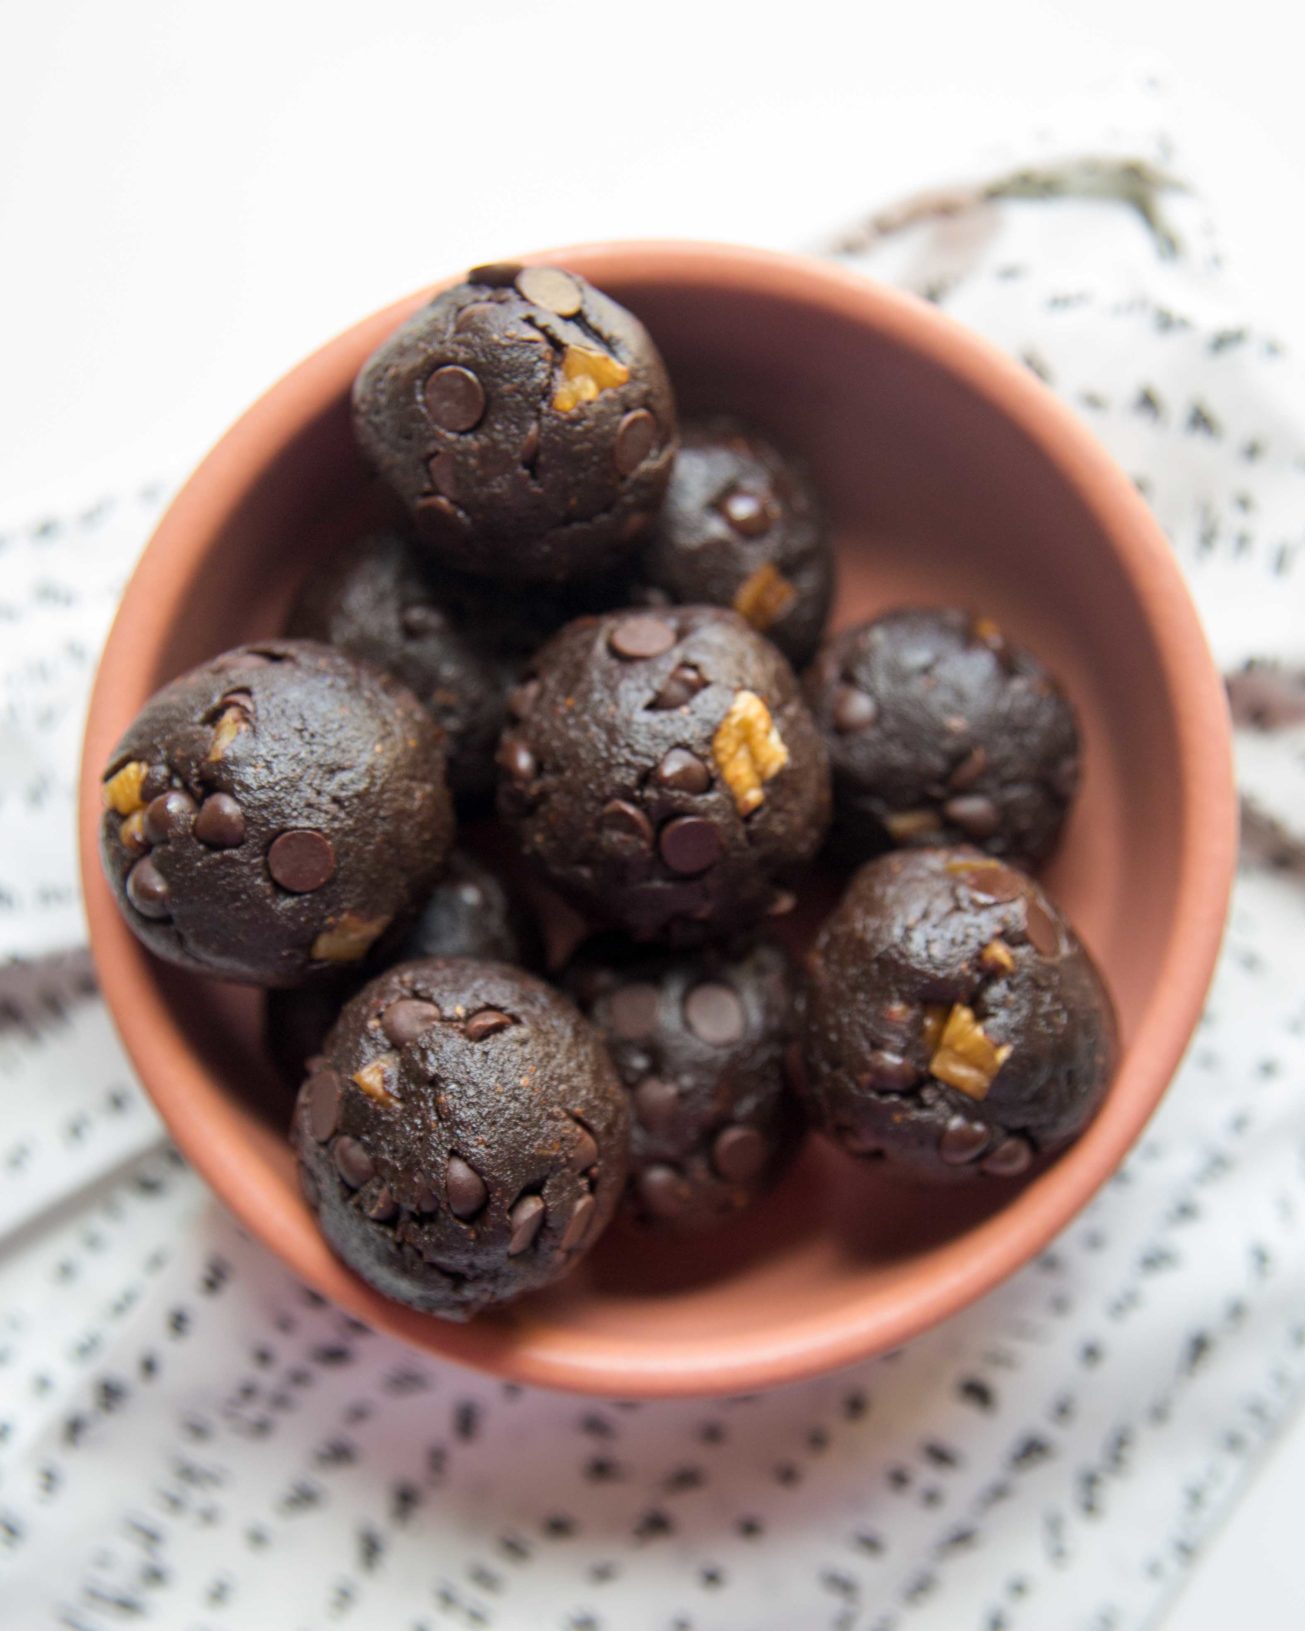 Chocolate bliss balls are a snack that won't wreck your afternoon. Have you tried dried fig bliss balls? These healthy bliss balls satisfy your sweet tooth.